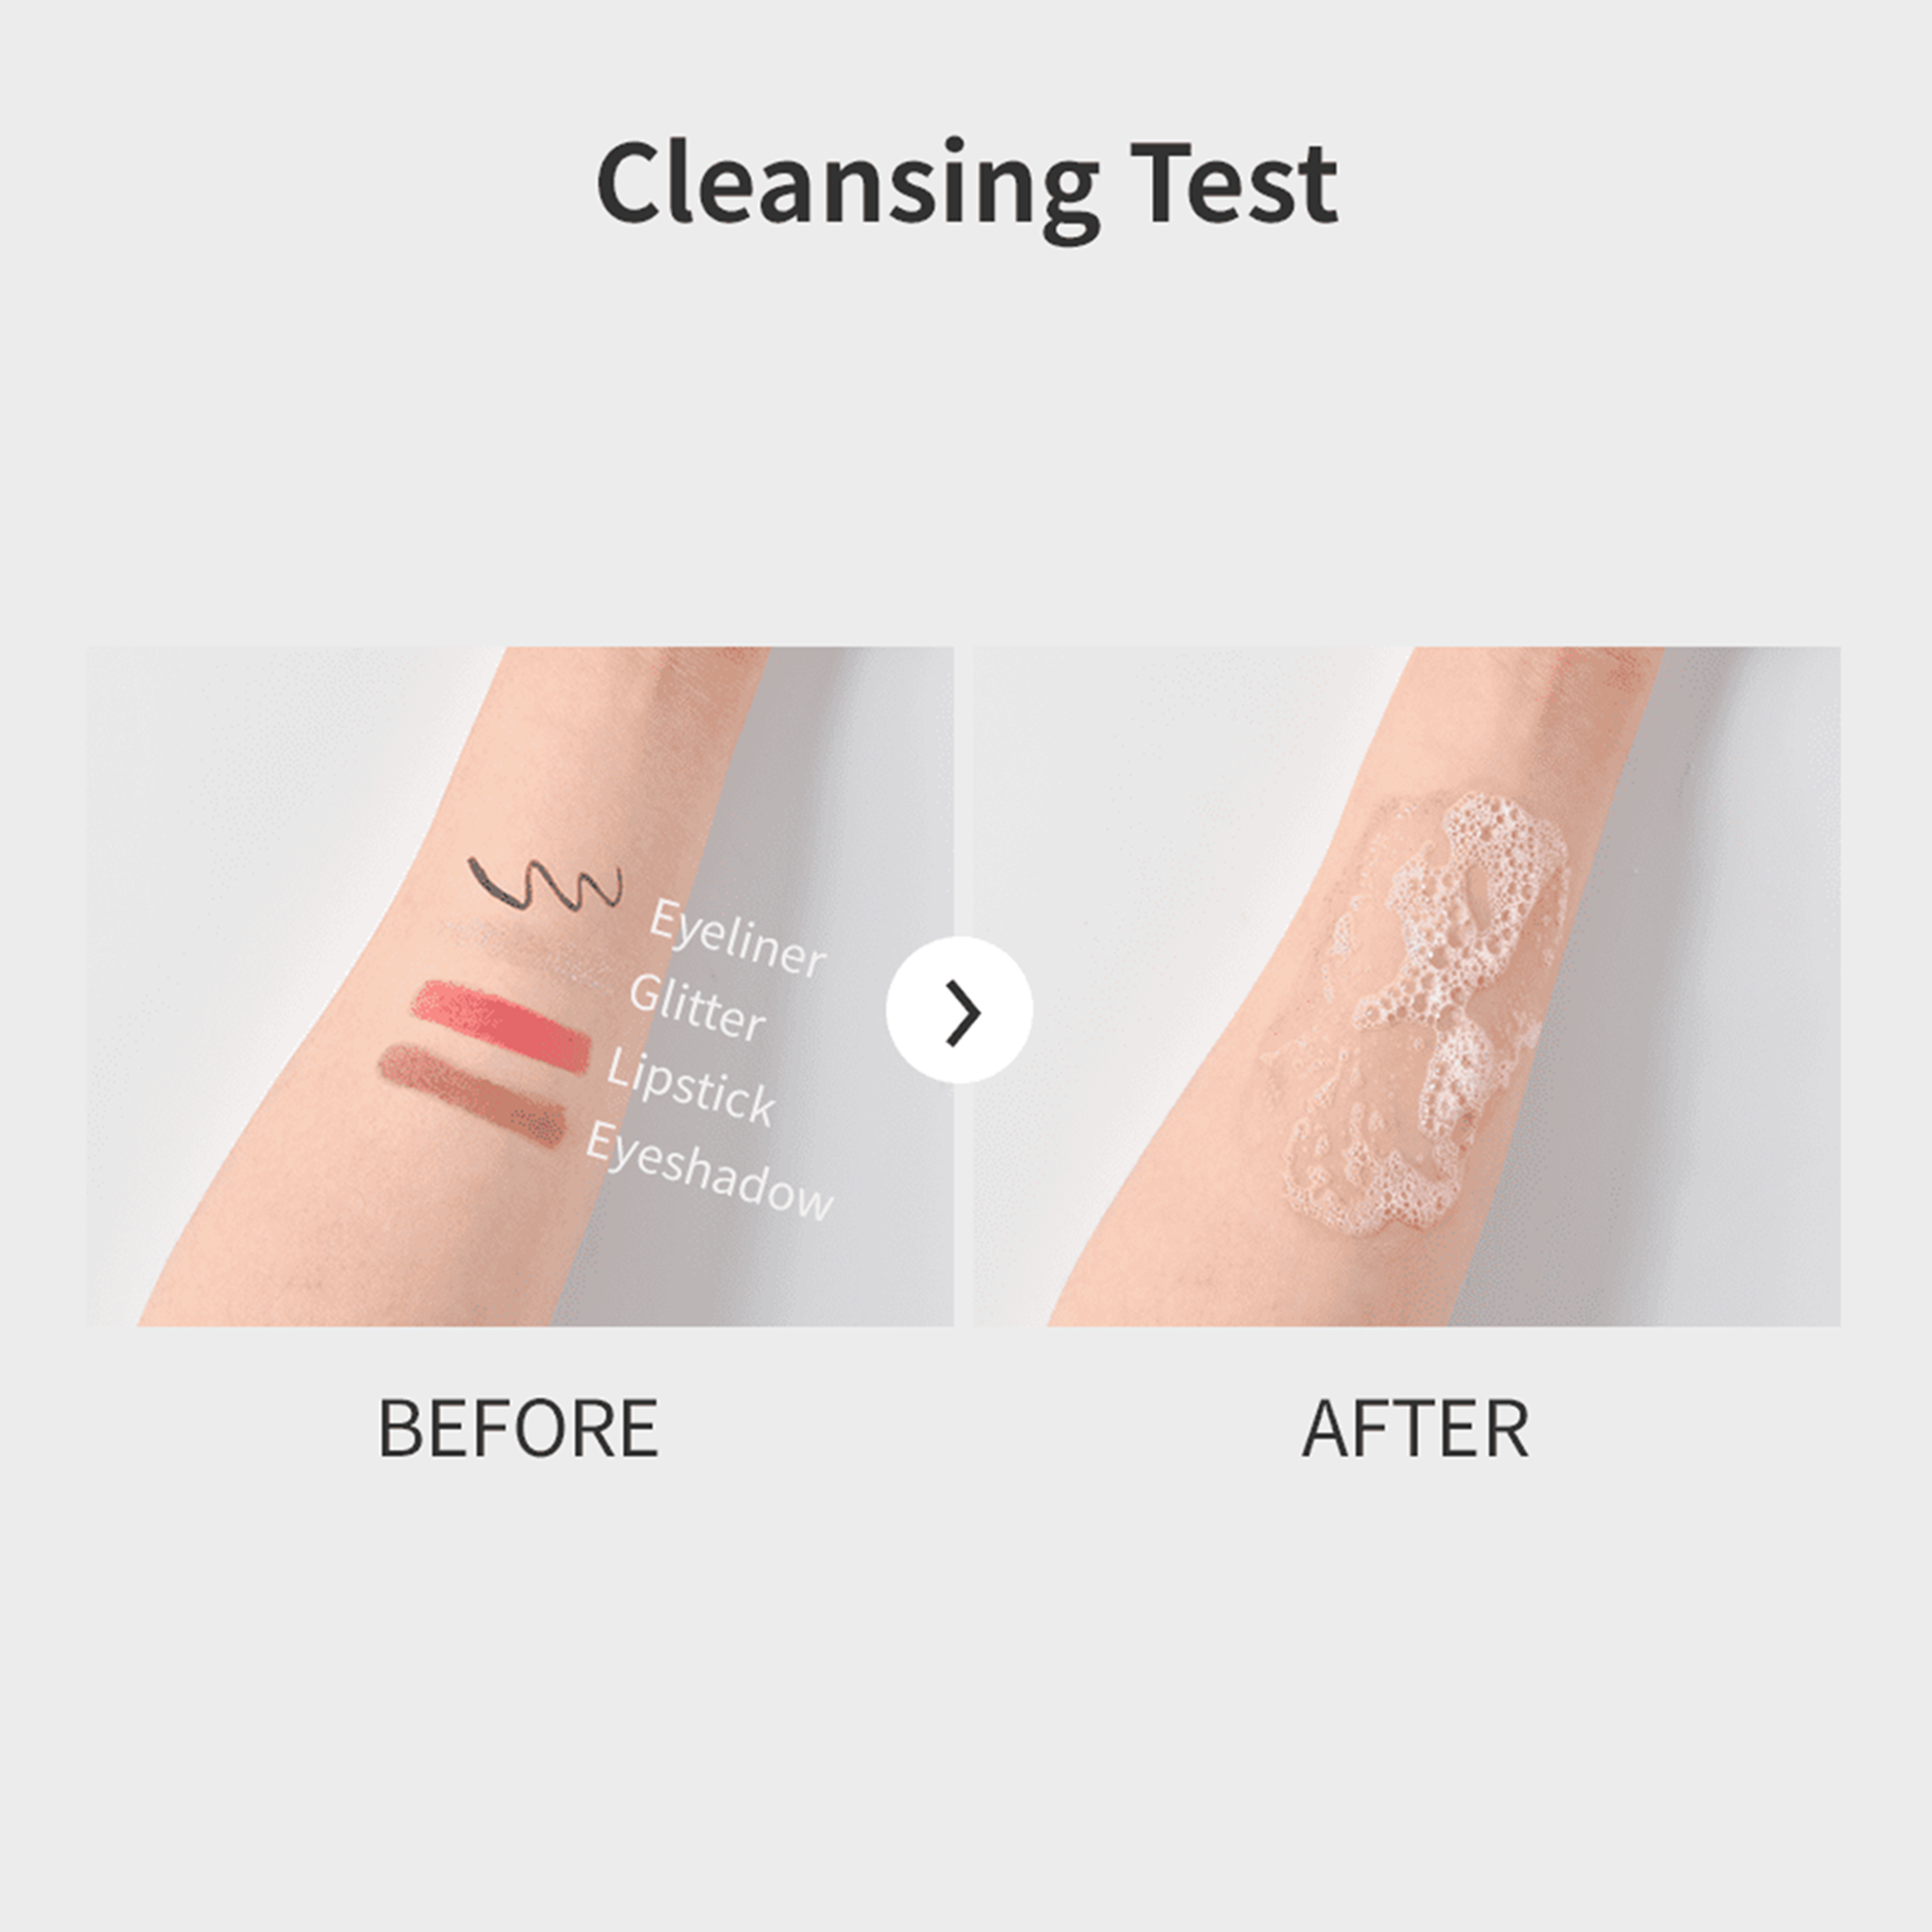 comparing makeup arms before and after using cleanser